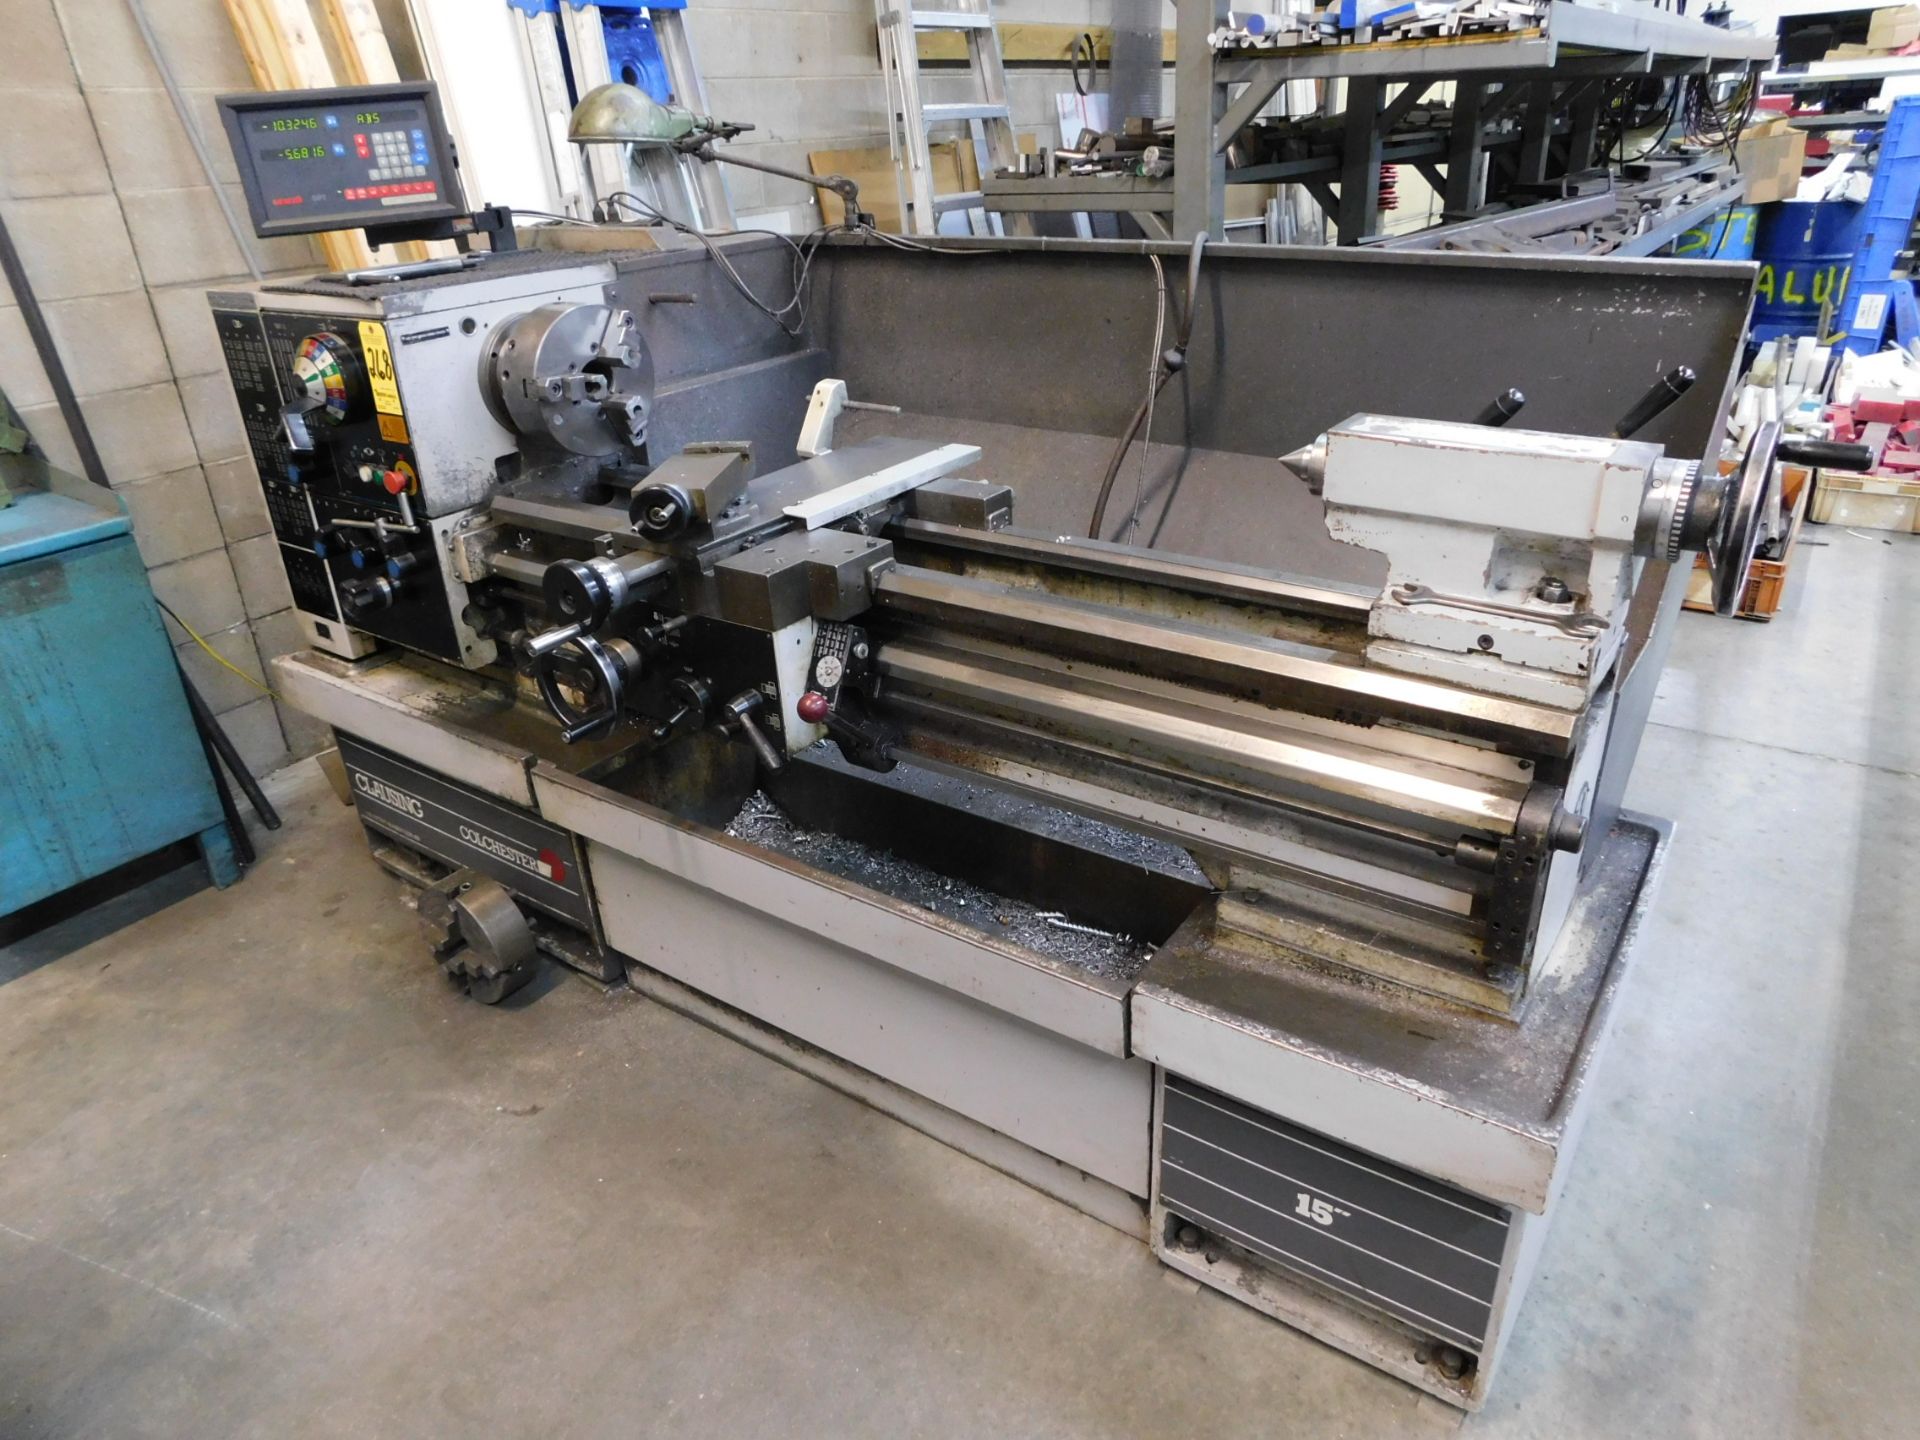 Clausing Colchester 15” X 48” Tool Room Lathe, s/n 610151, New 1997, Inch/Metric, Gap Bed, Newall